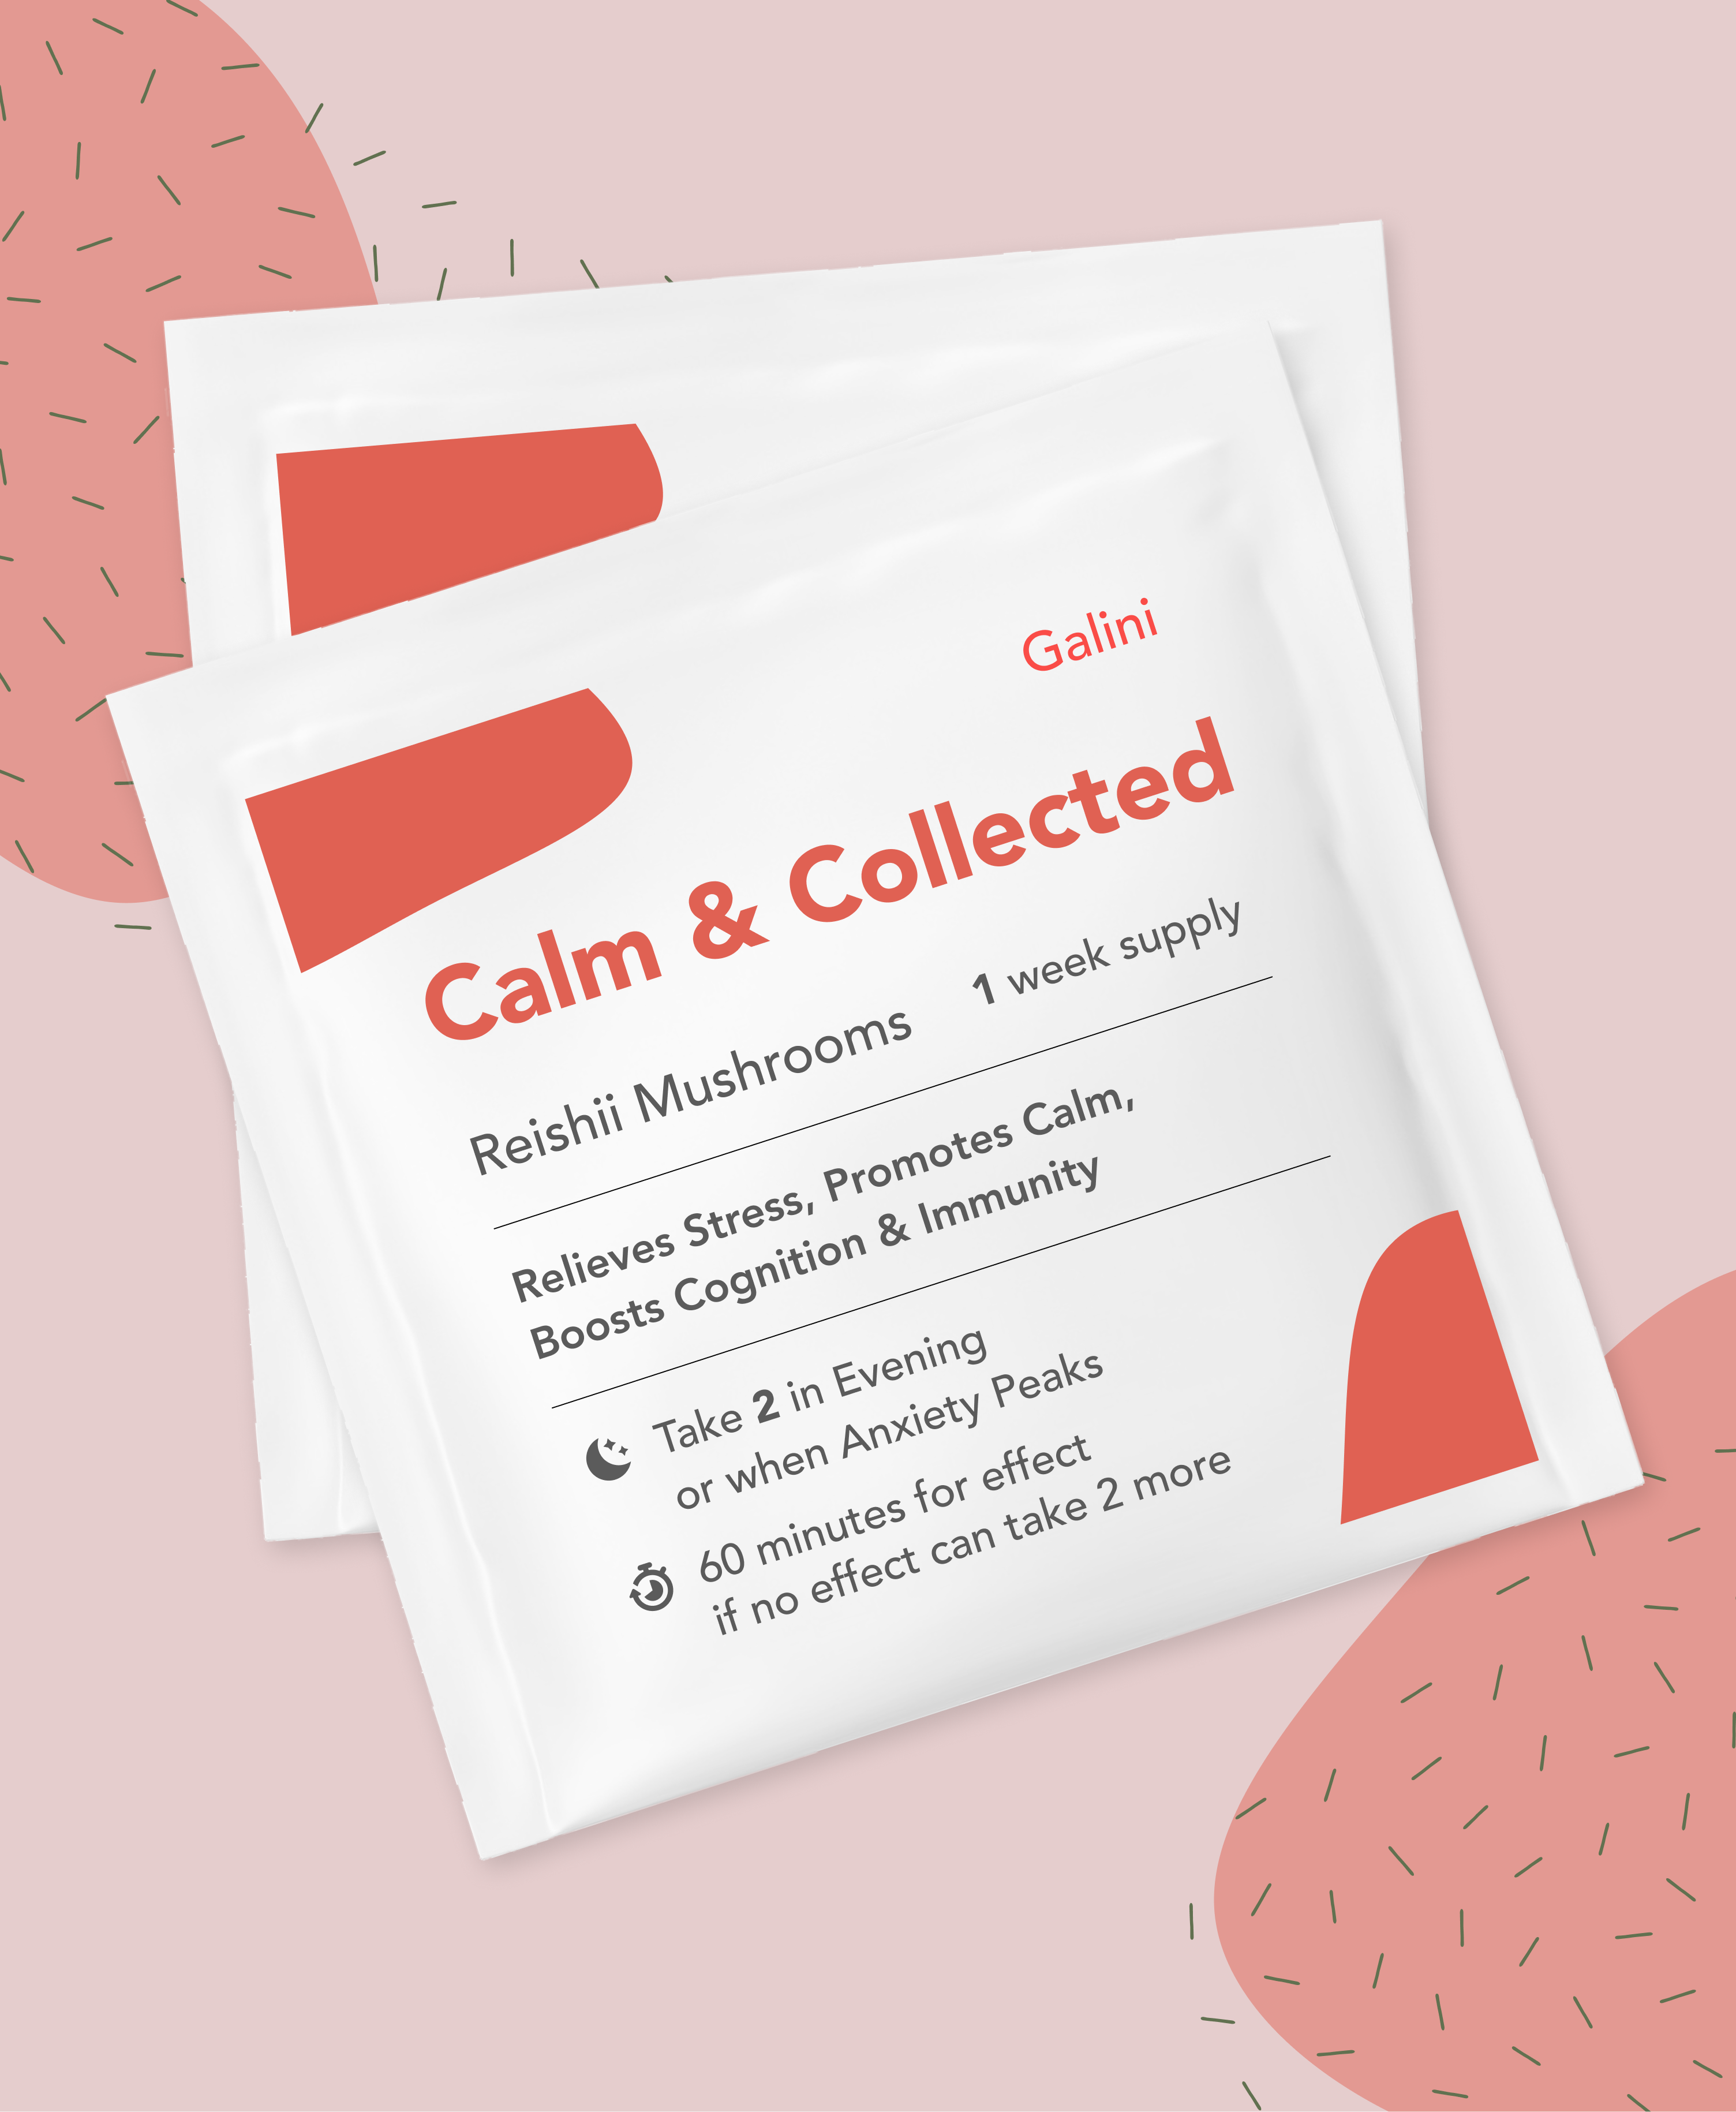 Calm and Collected supplement containing Reishi mushrooms